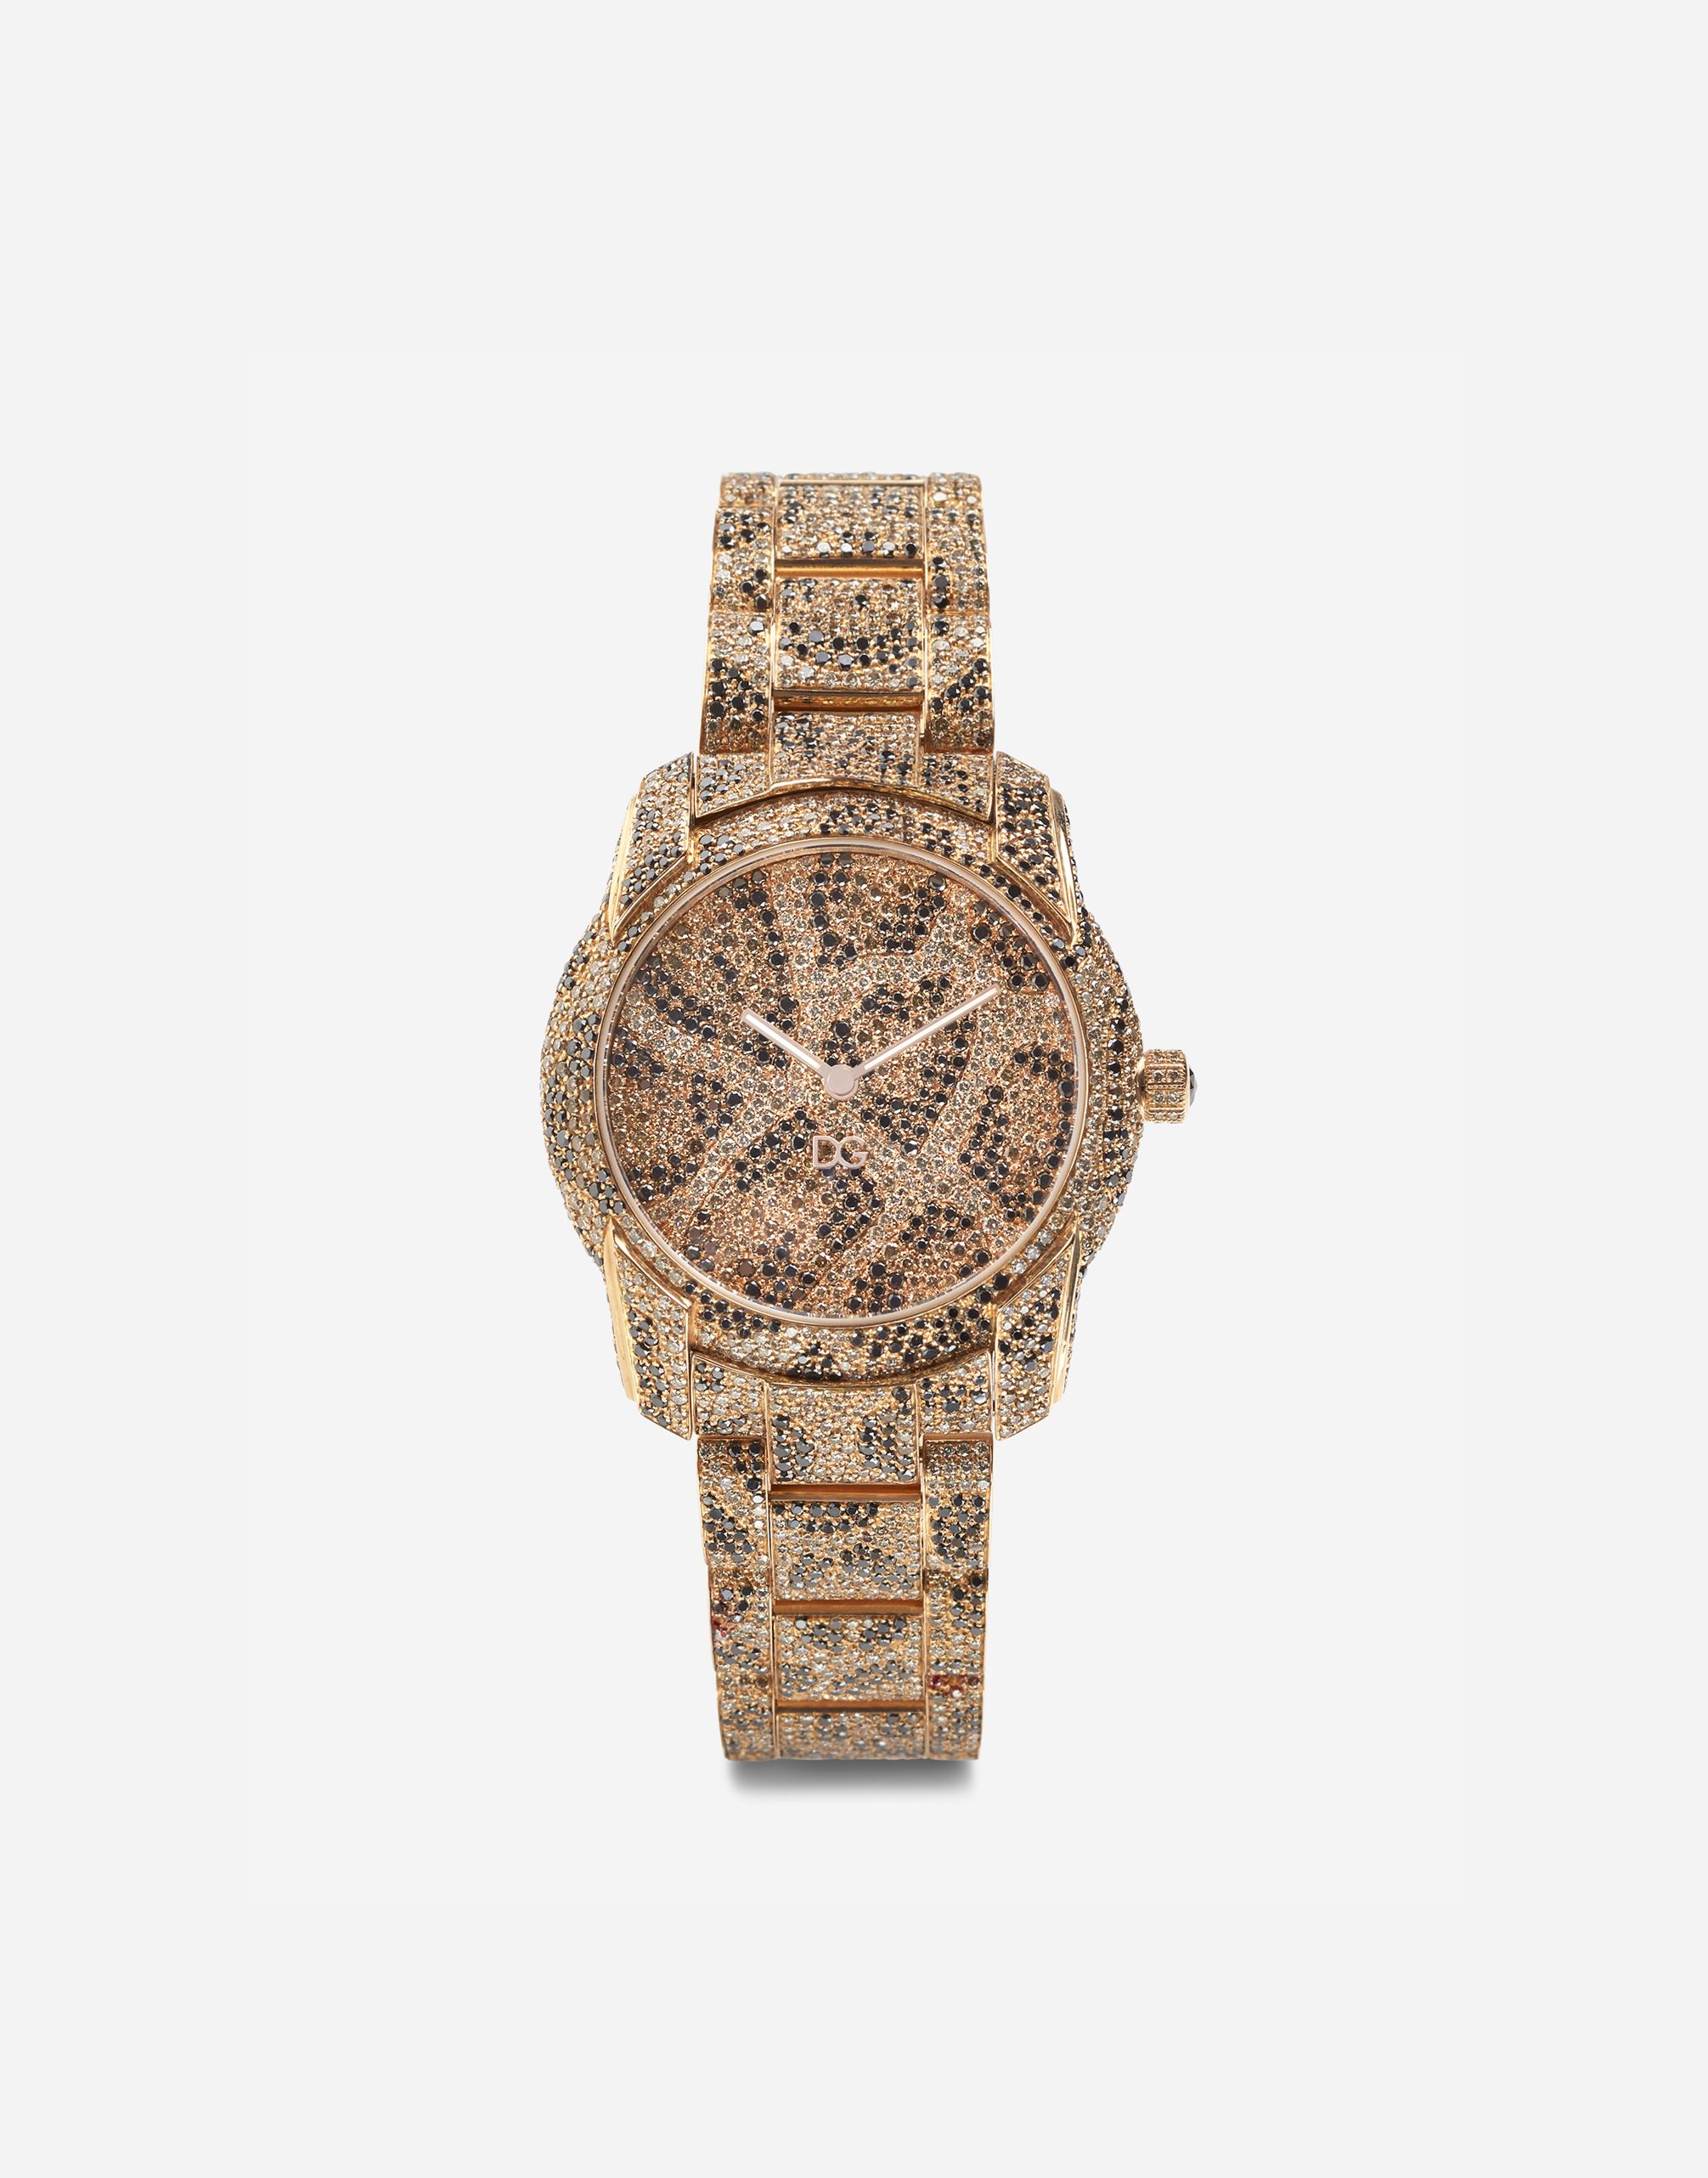 Dolce & Gabbana Dg7 Leo Watch In Red Gold With Brown And Black Diamonds